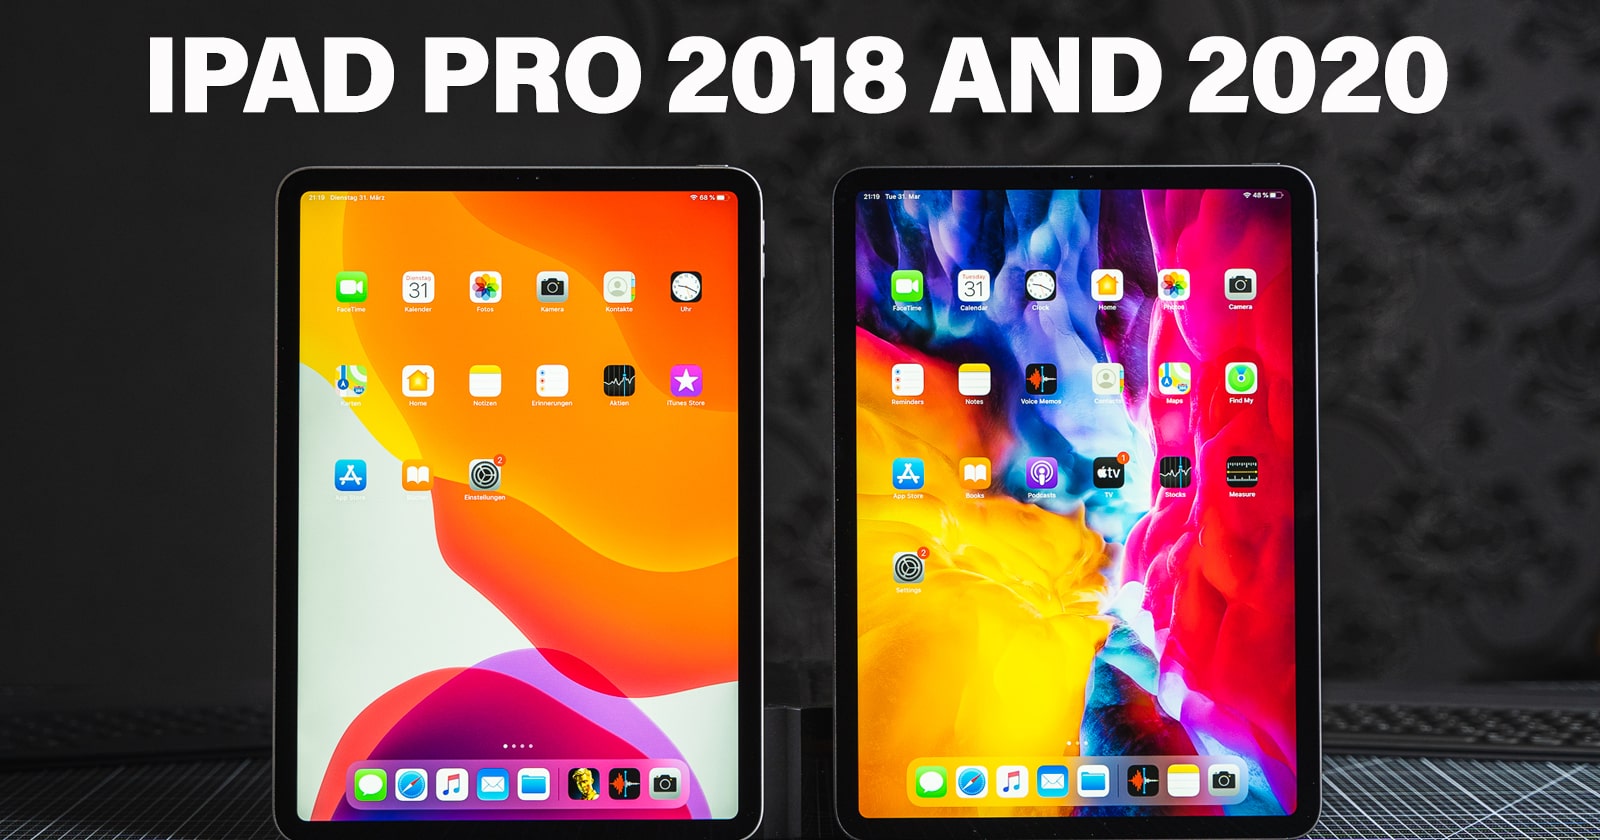 What Is the Difference Between iPad Pro 2018 and 2020?